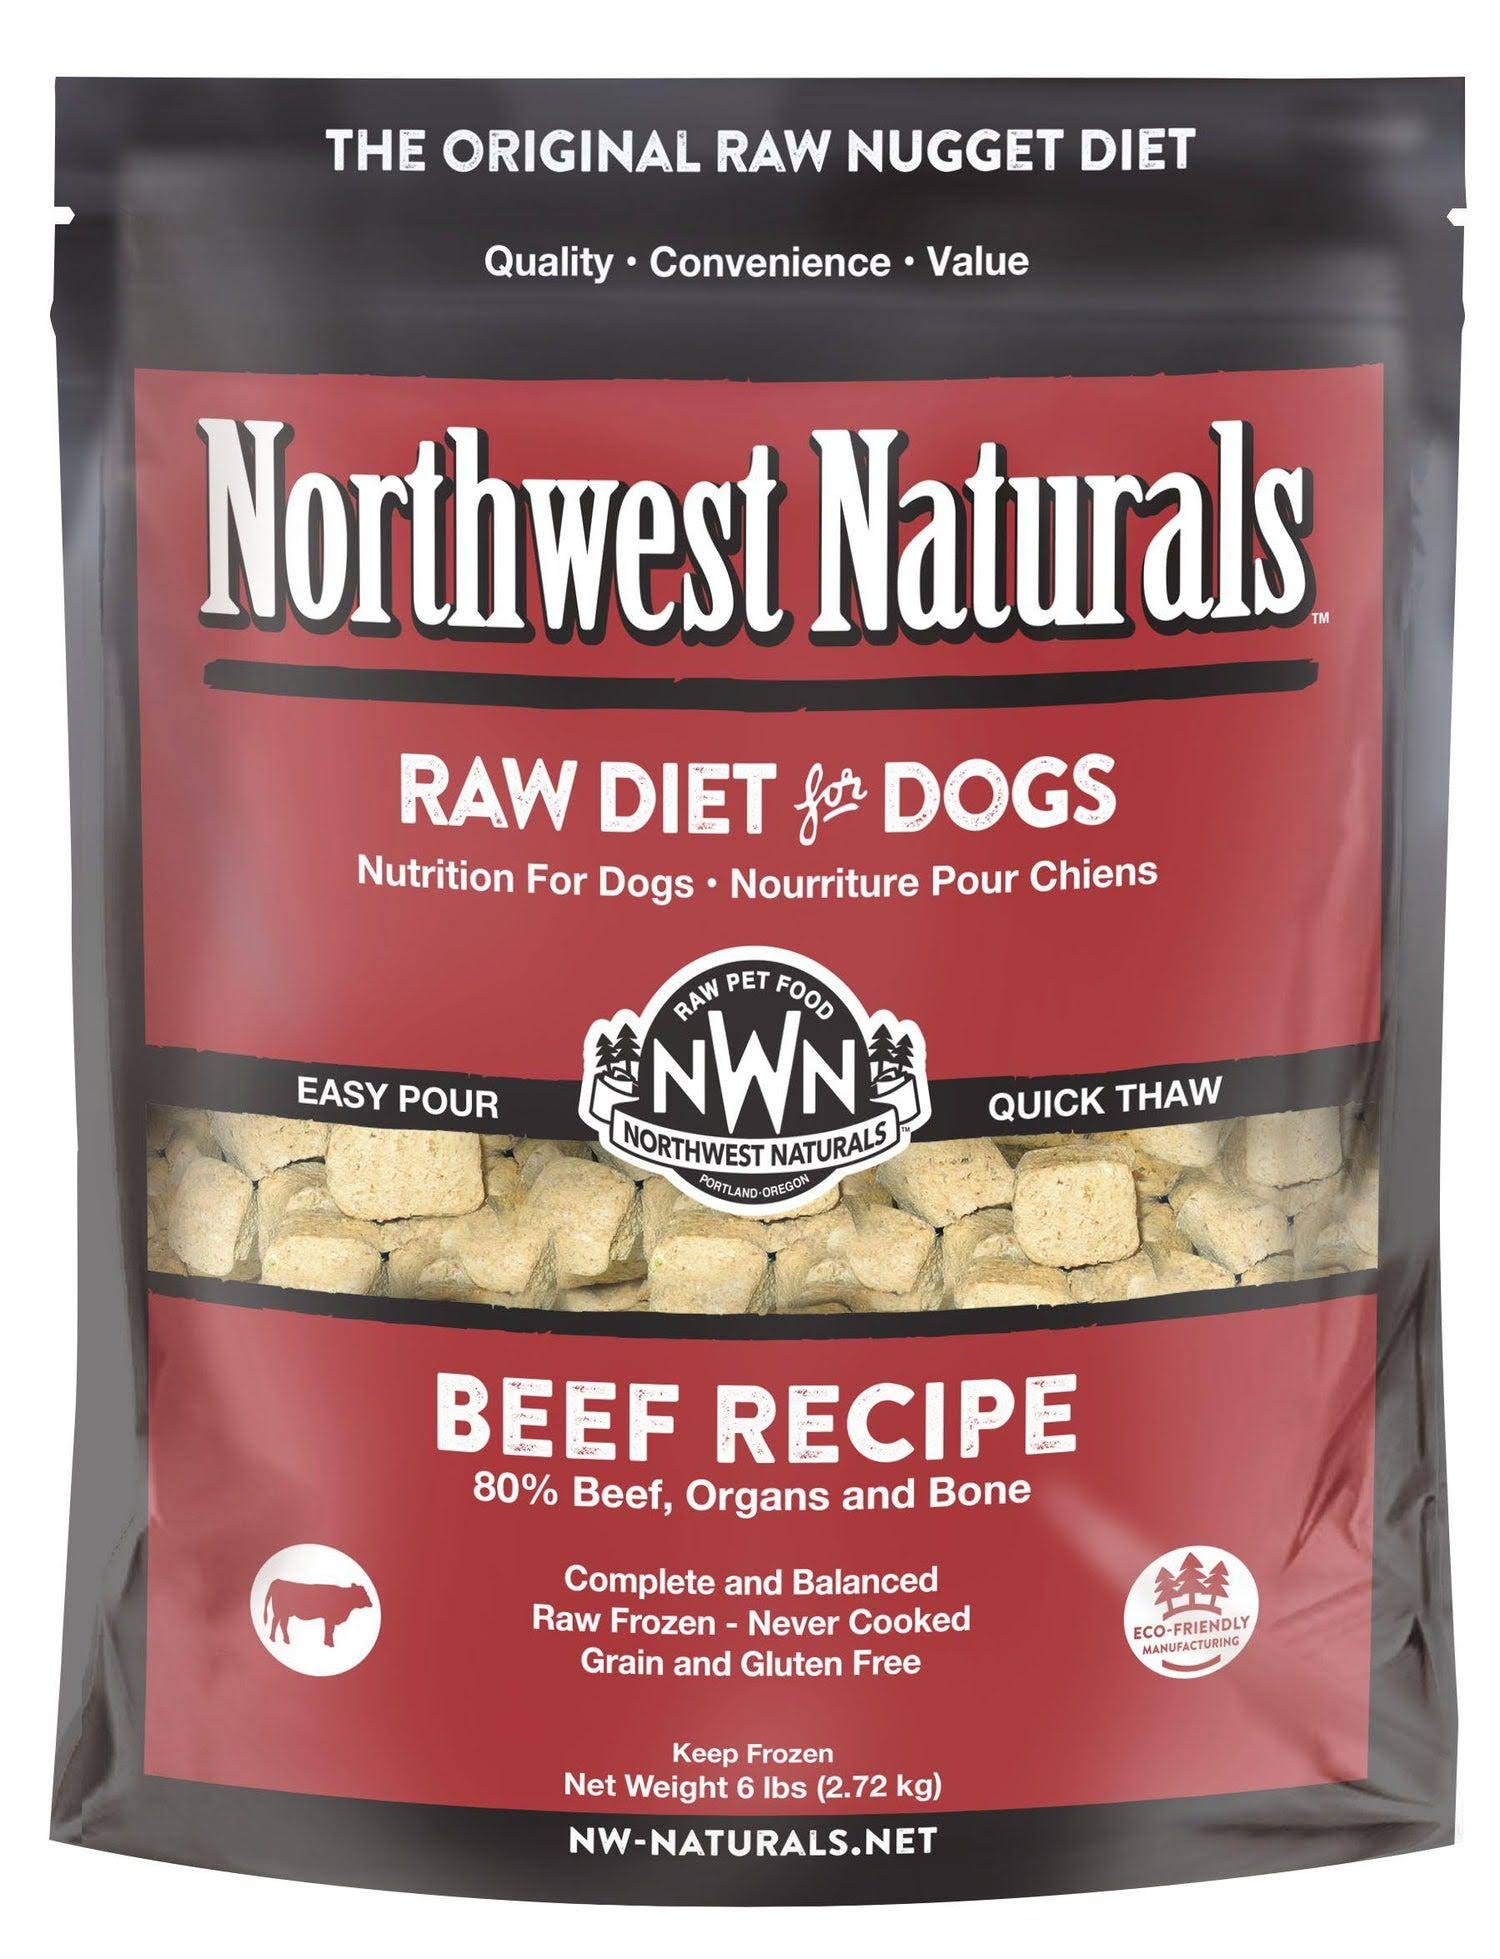 Northwest Naturals Nuggets Beef Recipe Frozen Raw Dog Food, 15 Pounds